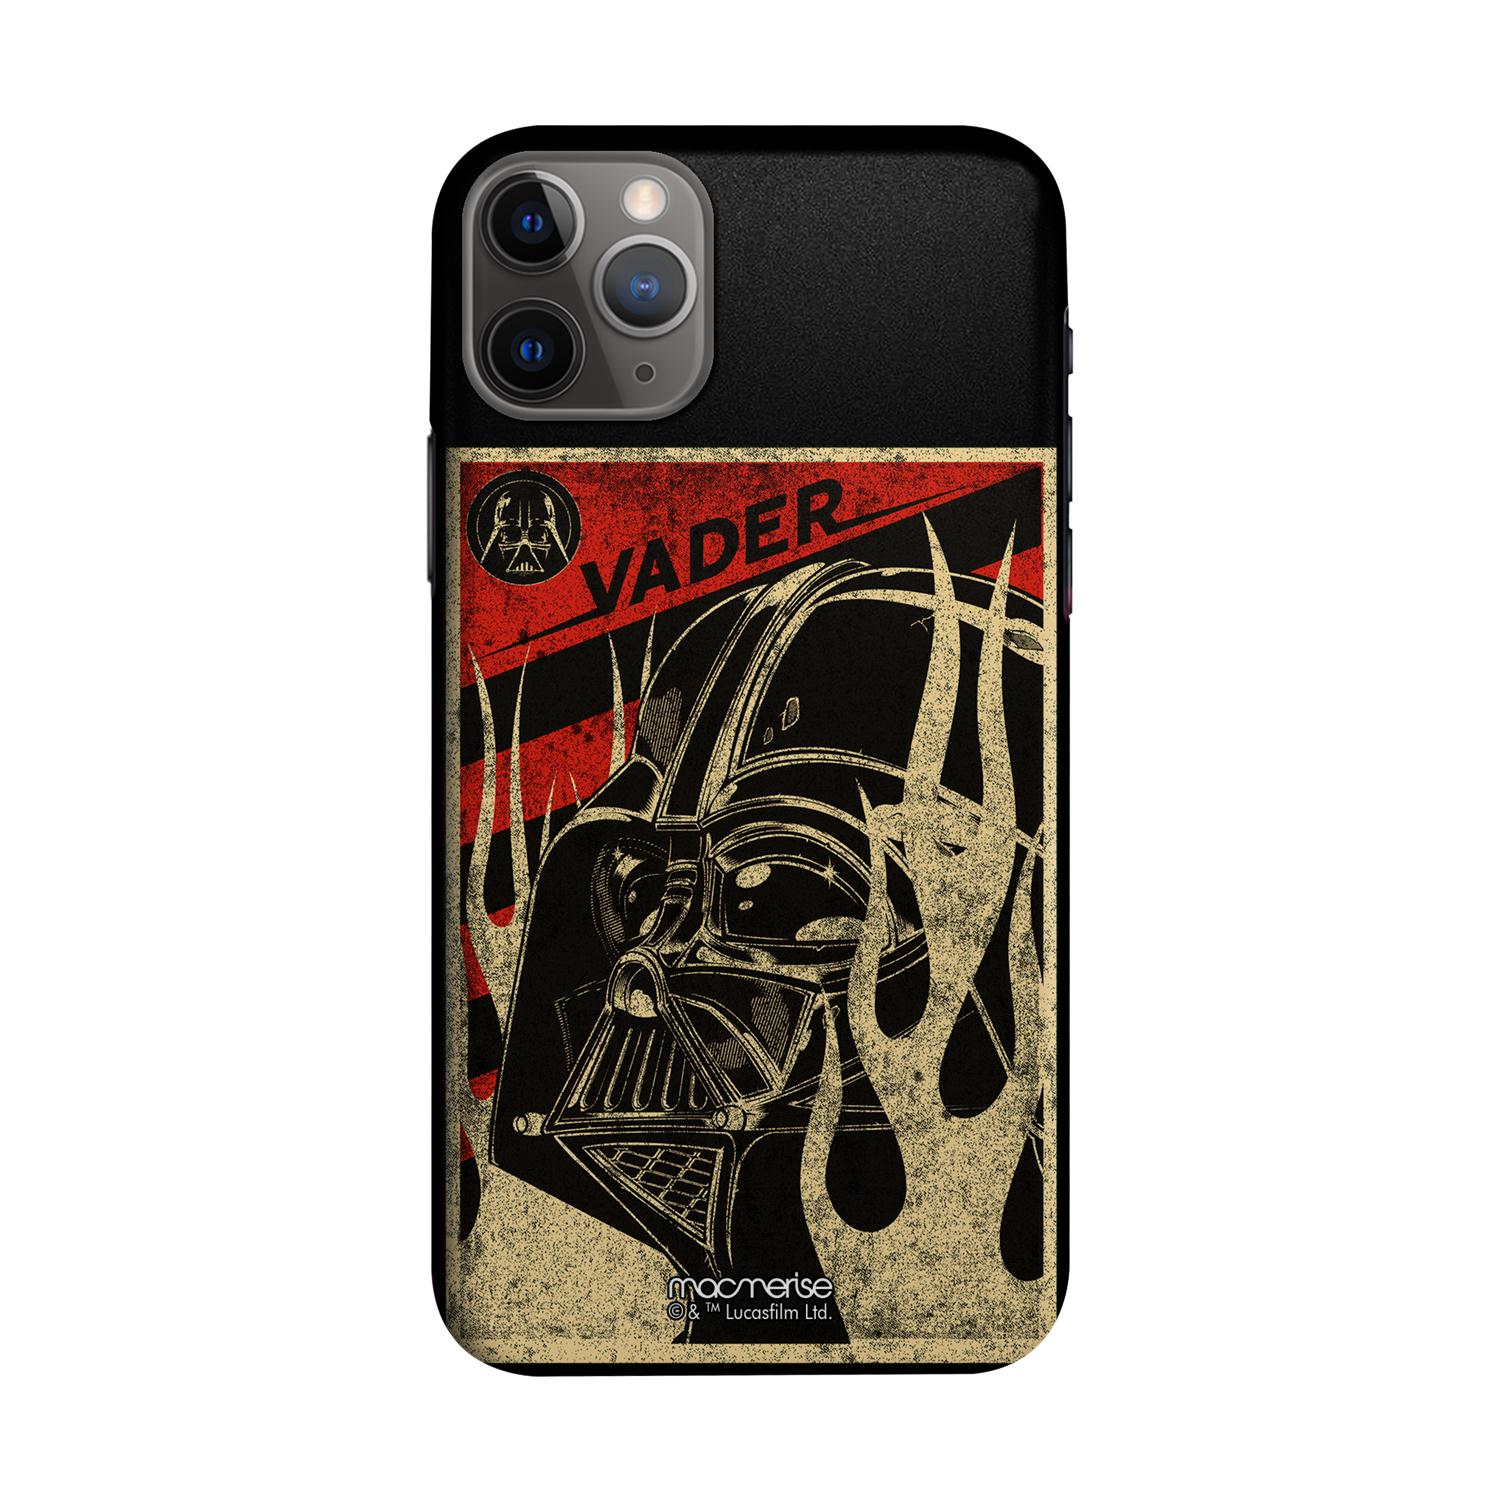 Vader Stamp - Sleek Phone Case for iPhone 11 Pro Max